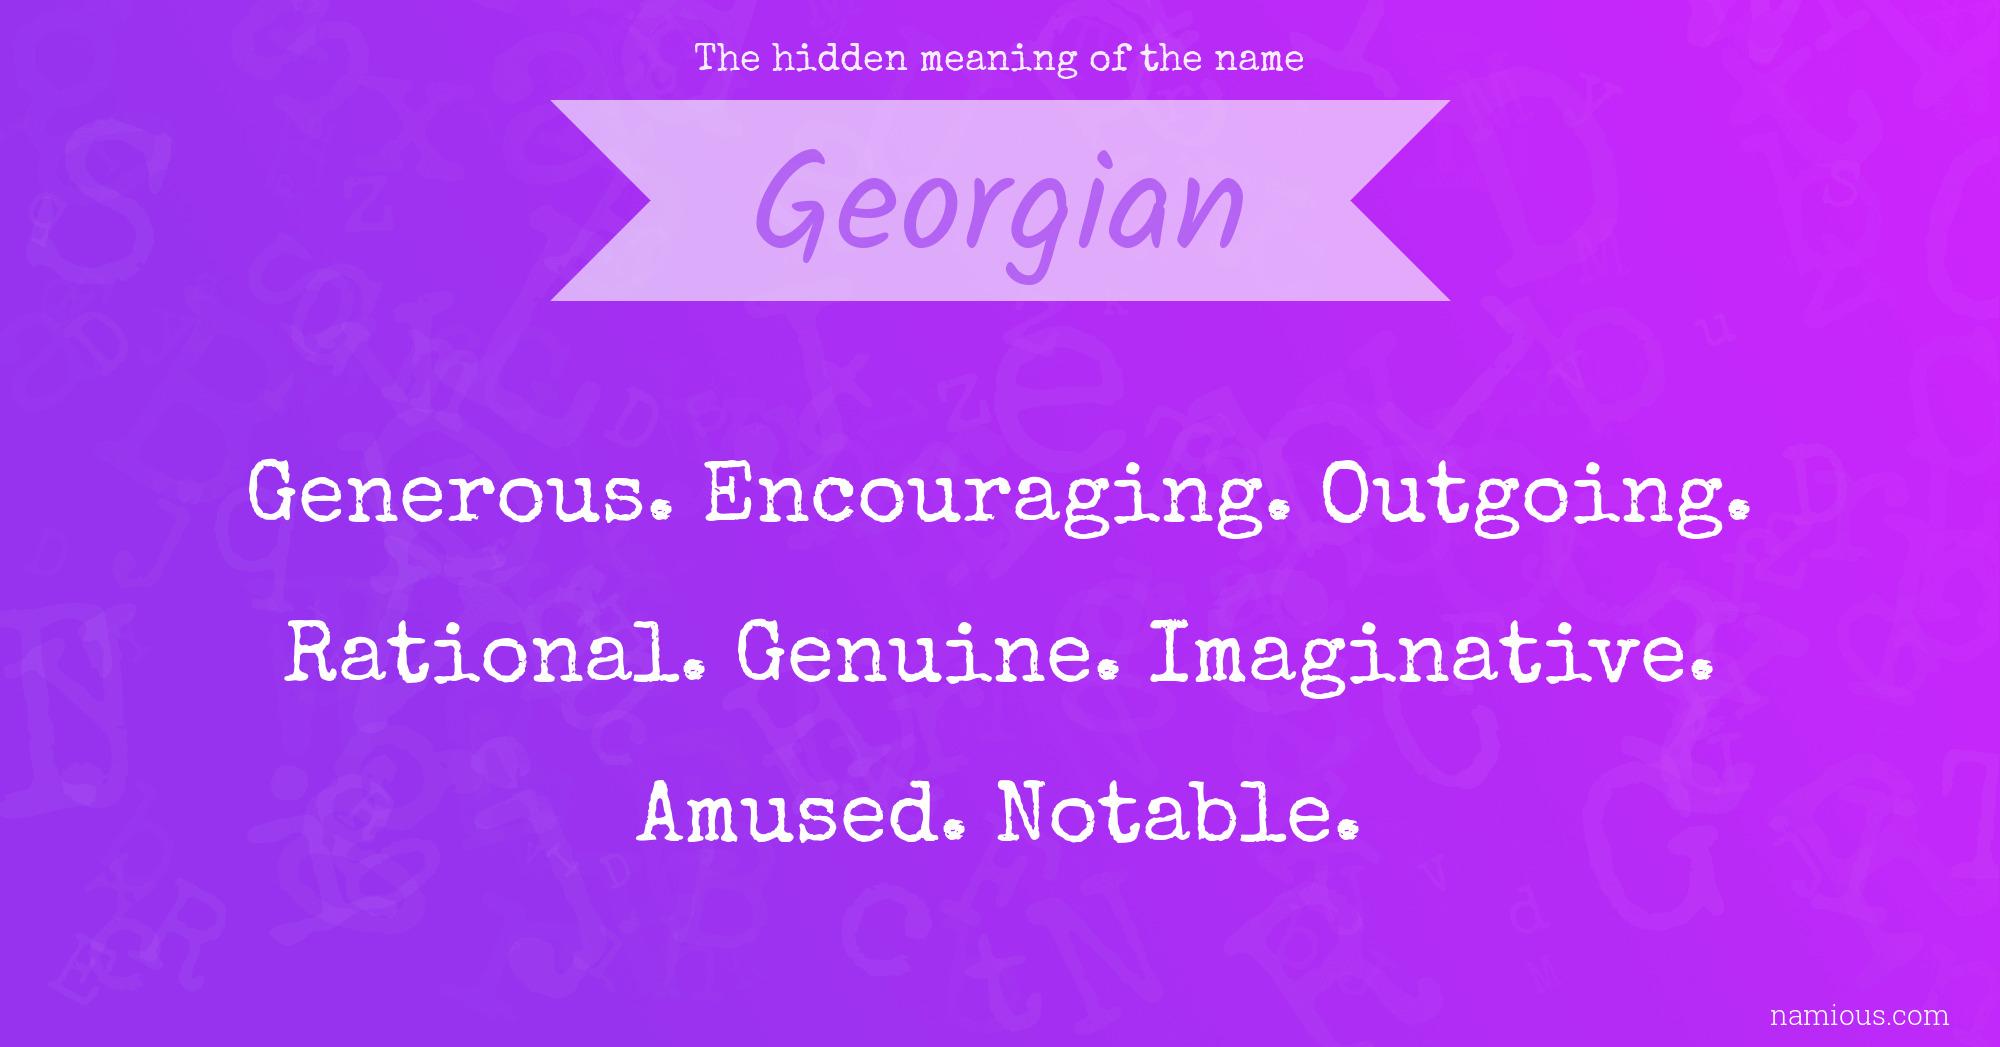 The hidden meaning of the name Georgian